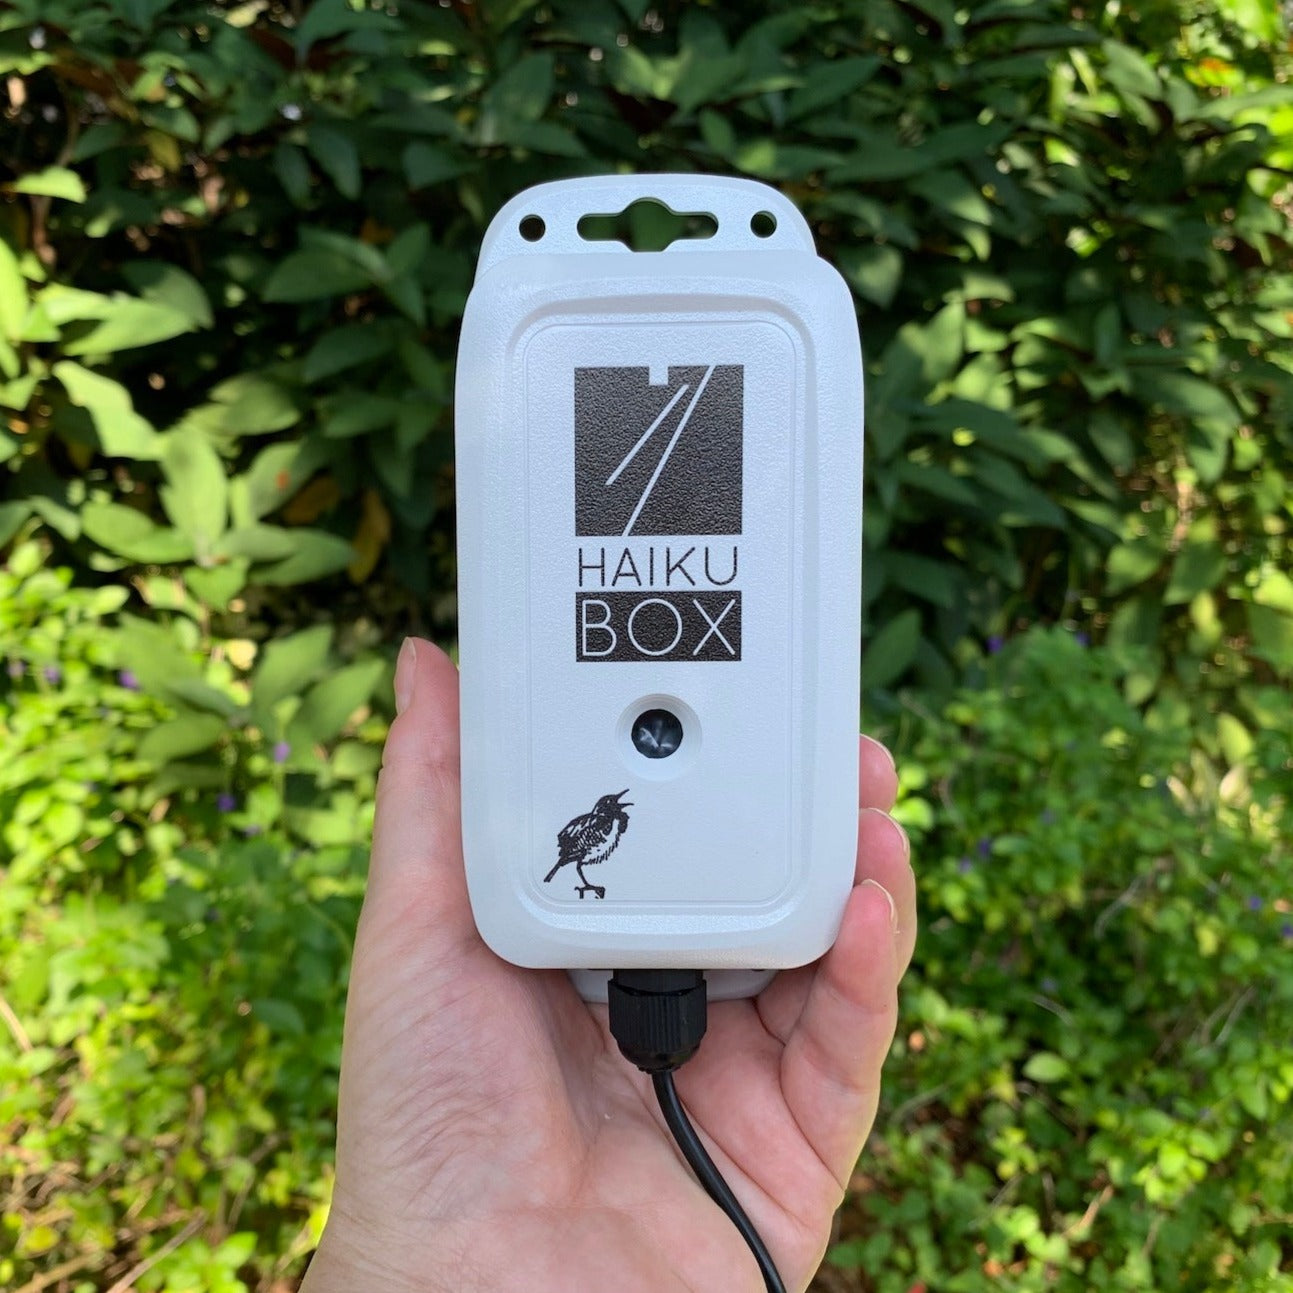 Haikubox for automatic and continuous birdsong identification